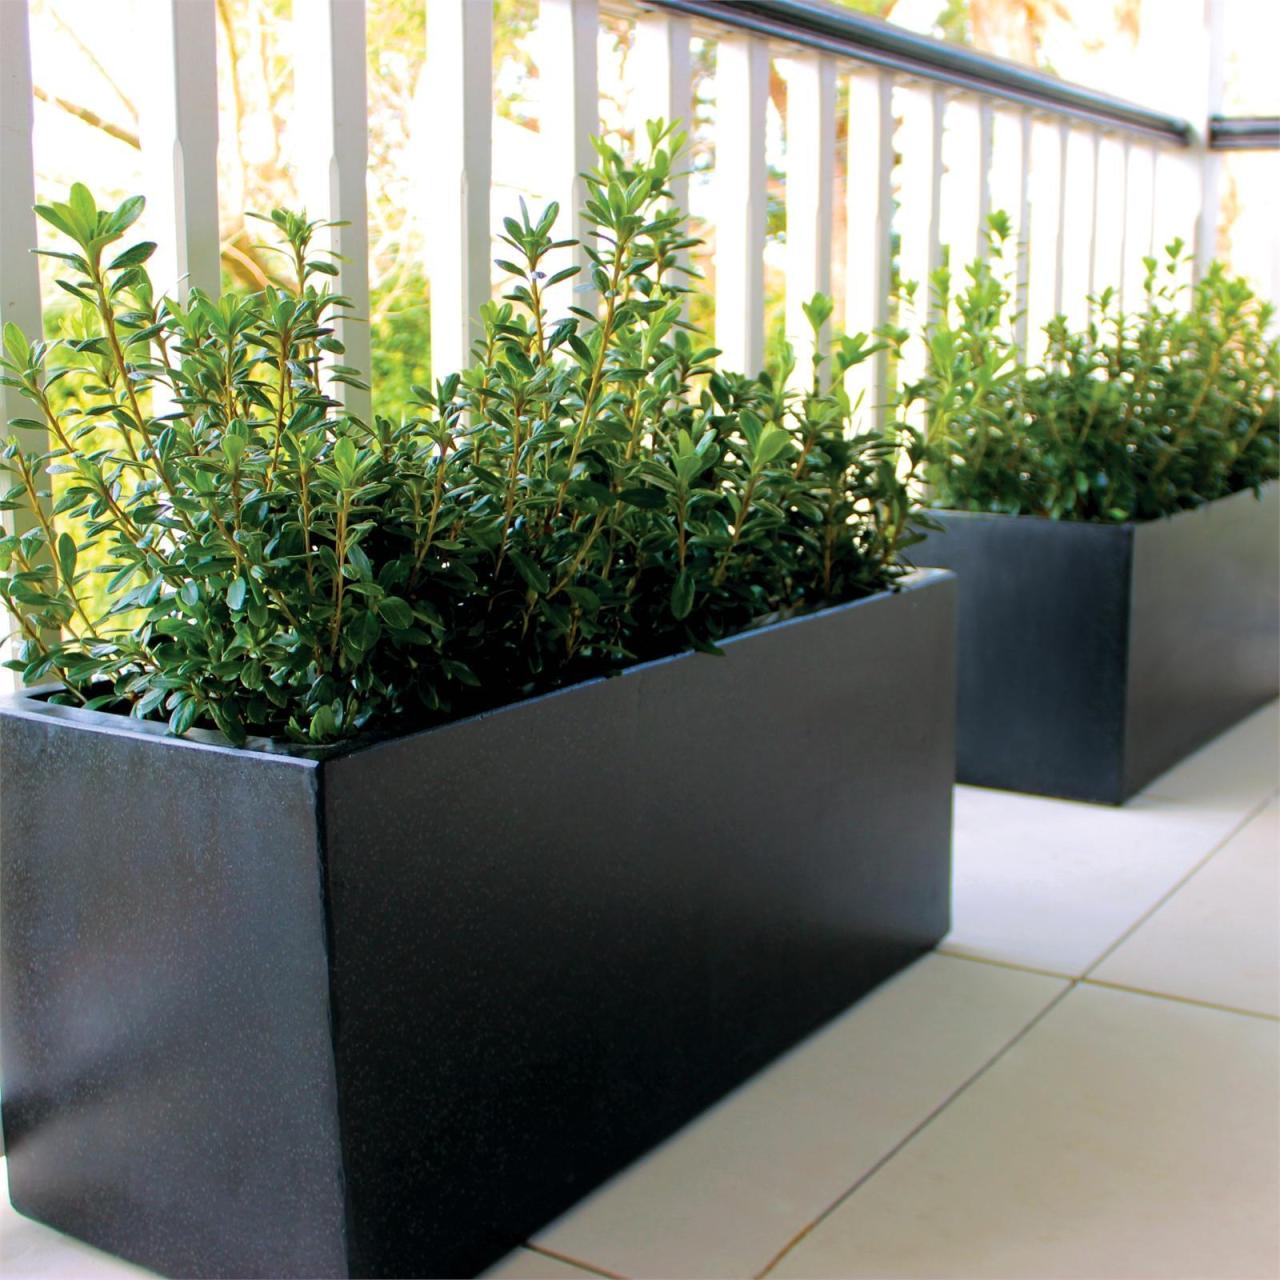 Hanging Plants Indoor | Bunnings Lightweight Pots: Elevate Your Gardening with Enhanced Portability and Durability